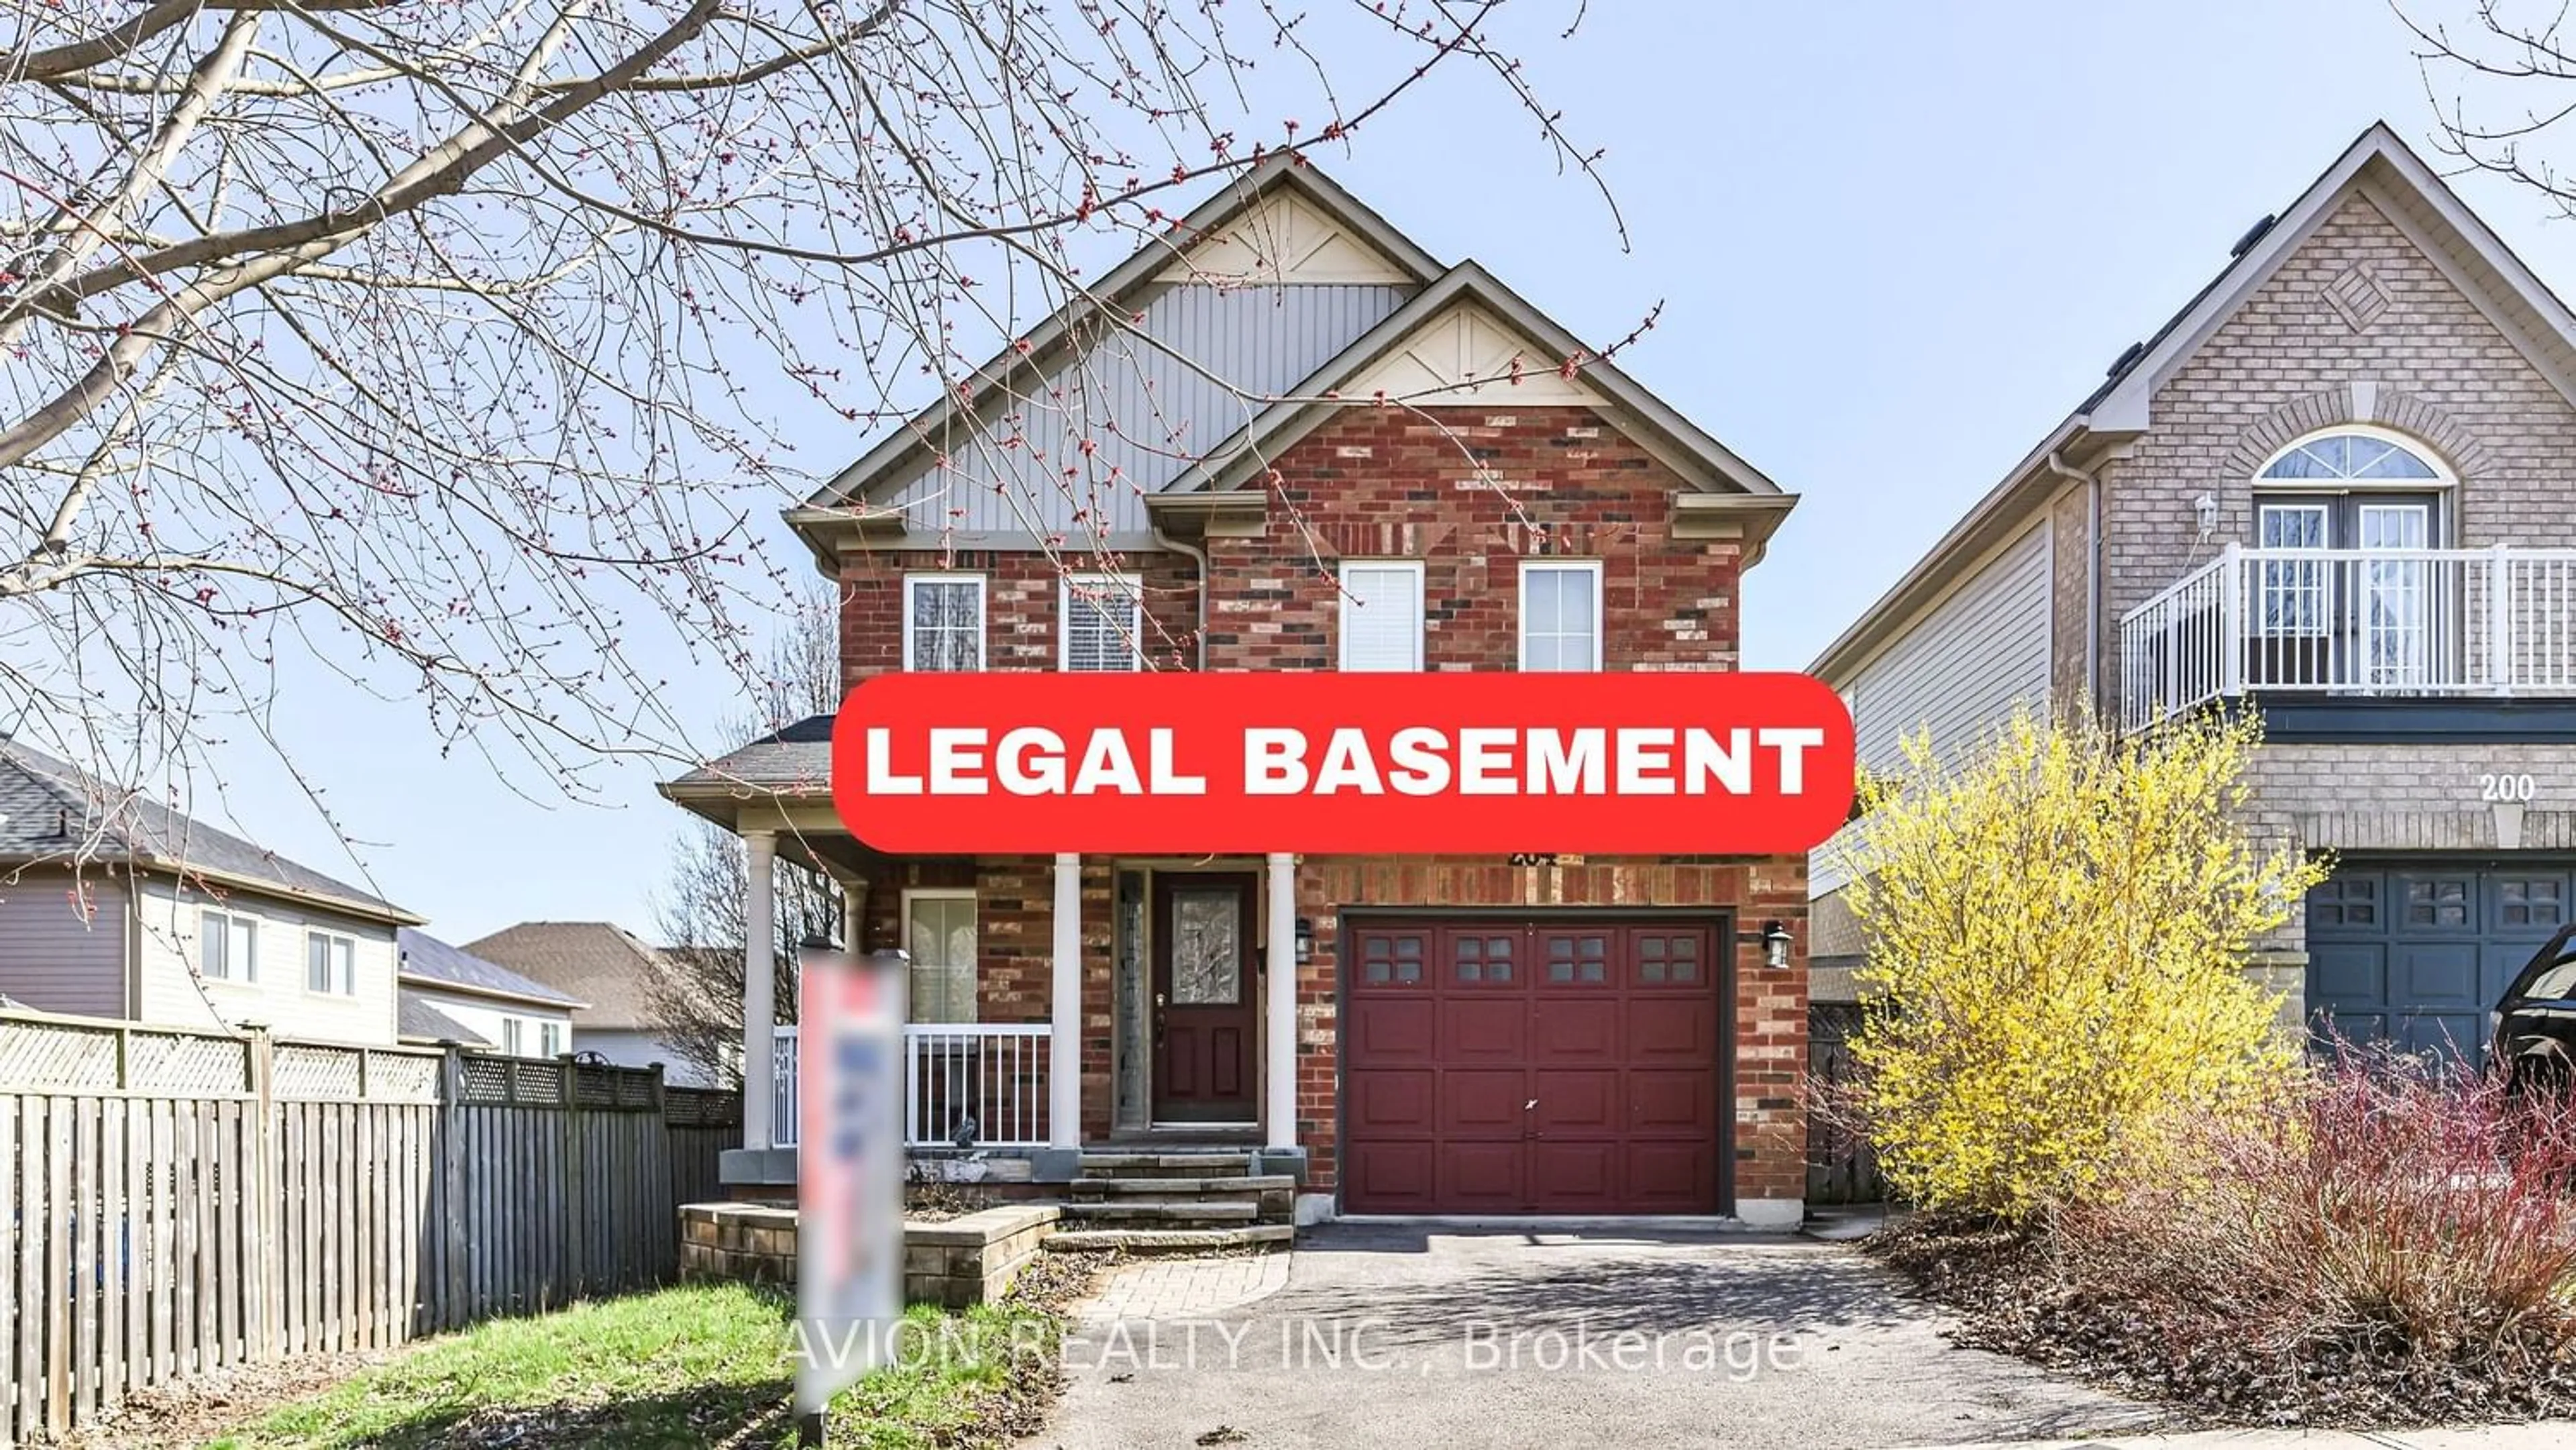 Frontside or backside of a home for 204 Bottrell St, Clarington Ontario L1C 5M9